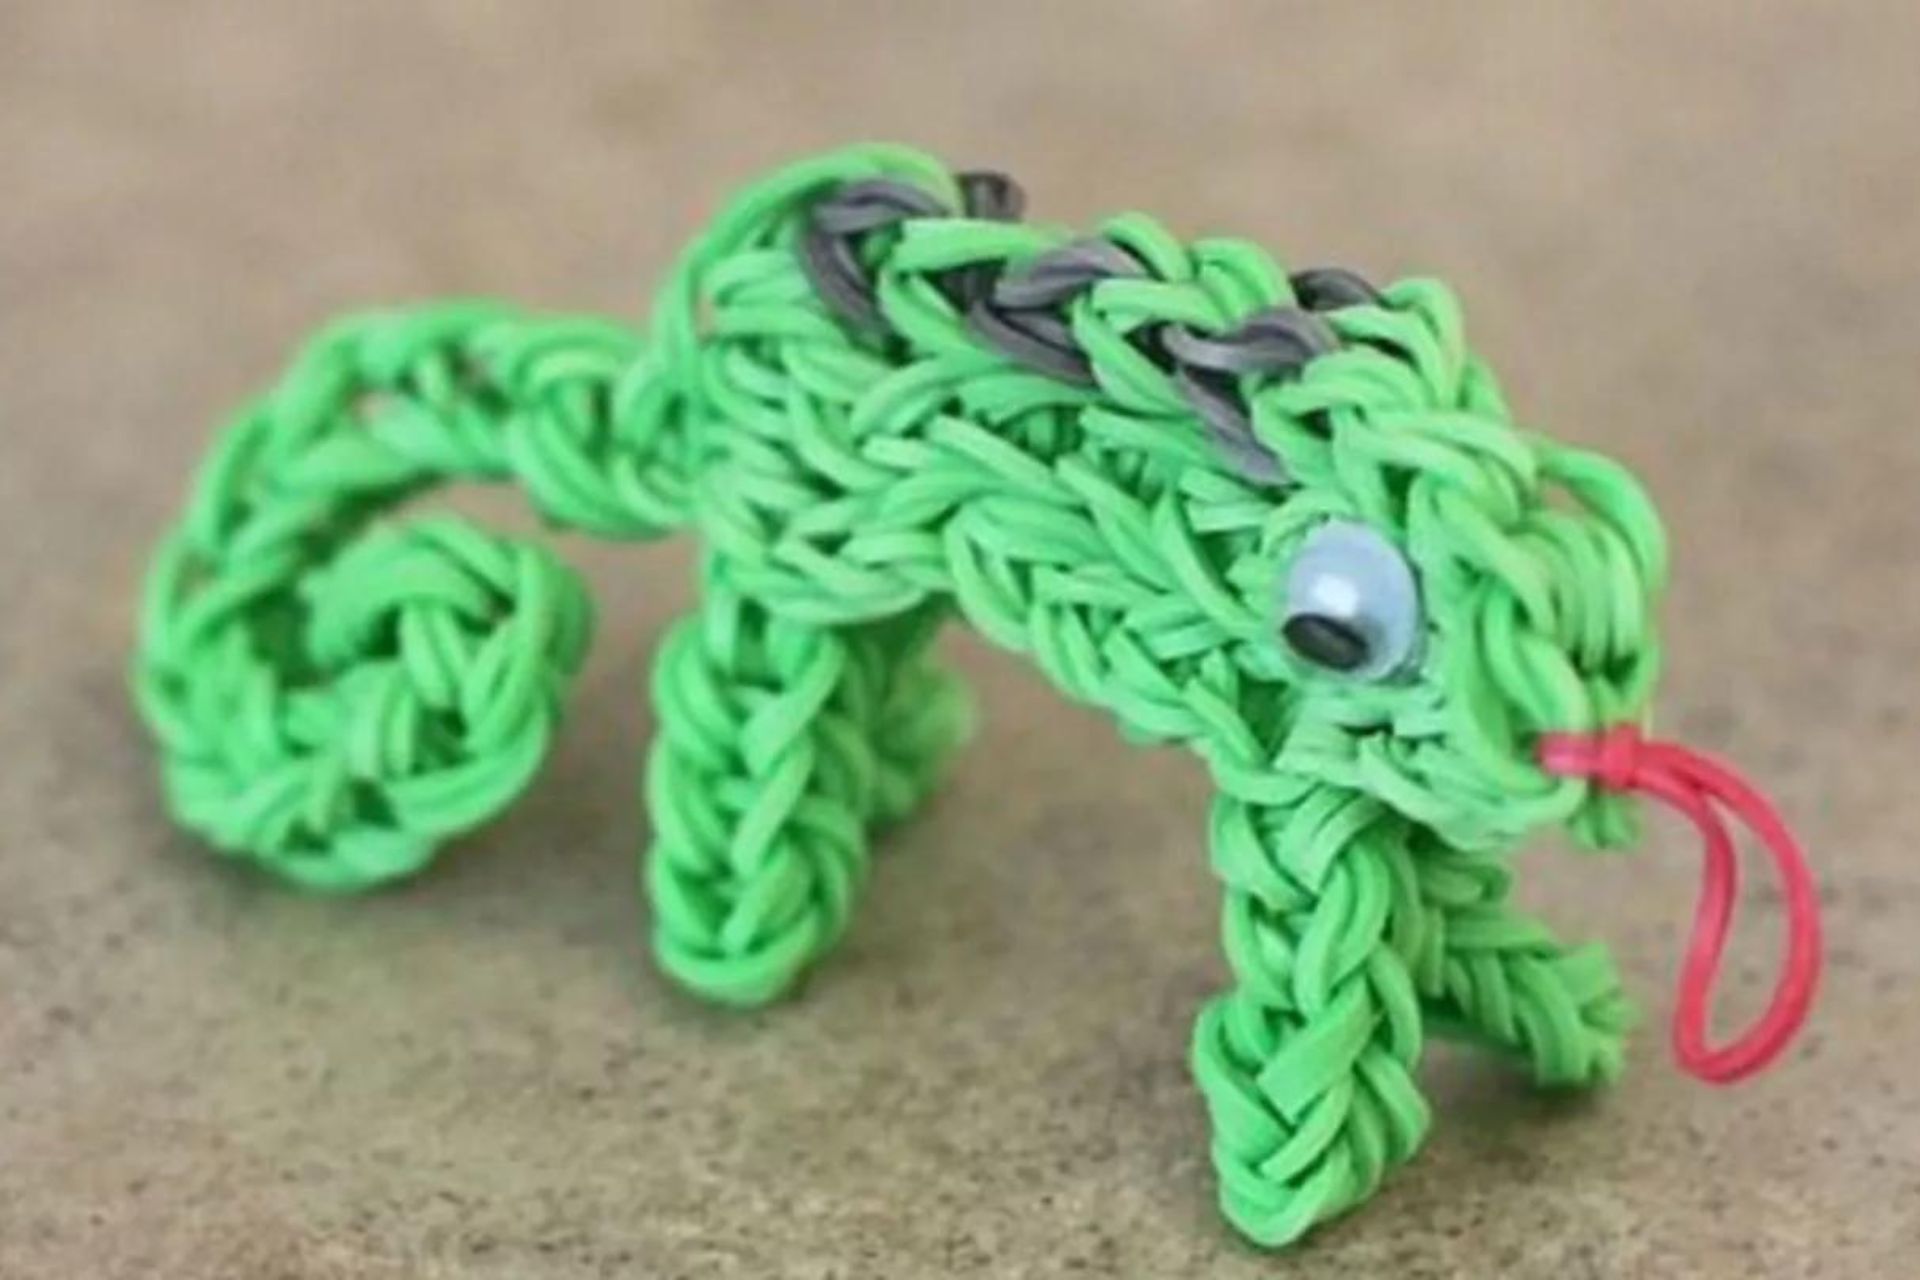 Easy crafts for kids illustrated by Loom band craft ideas for kids